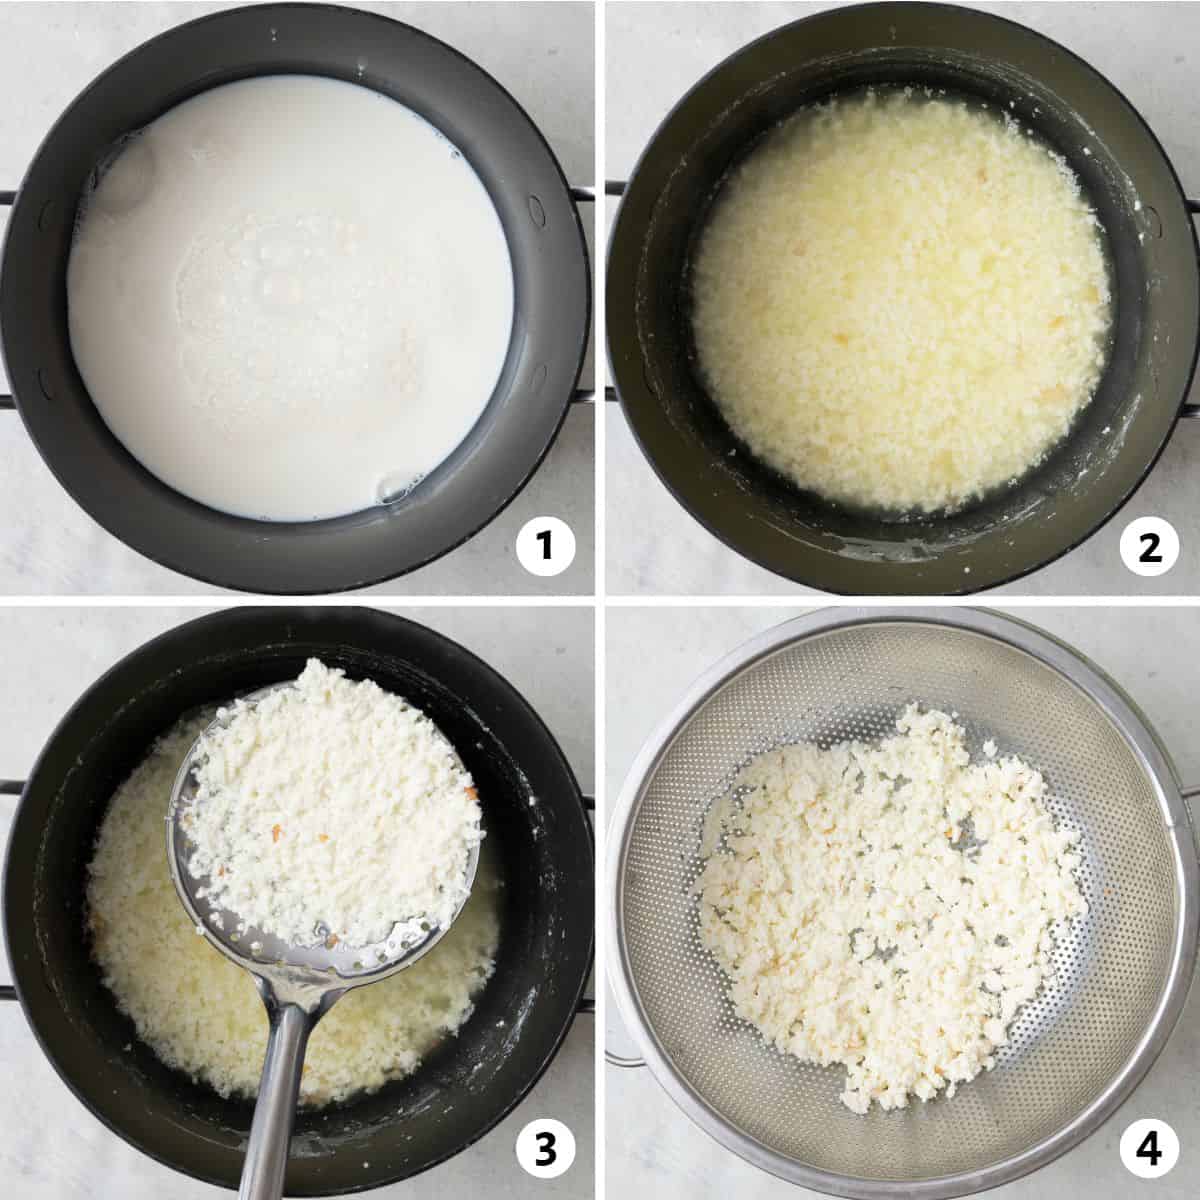 4 image collage making milk curds for recipe: 1- milk in a saucepan, 2- milk and vinegar after separating the milk, 3- slotted spoon removing clotted cream above the pot, 4- clotted cream in a strainer.